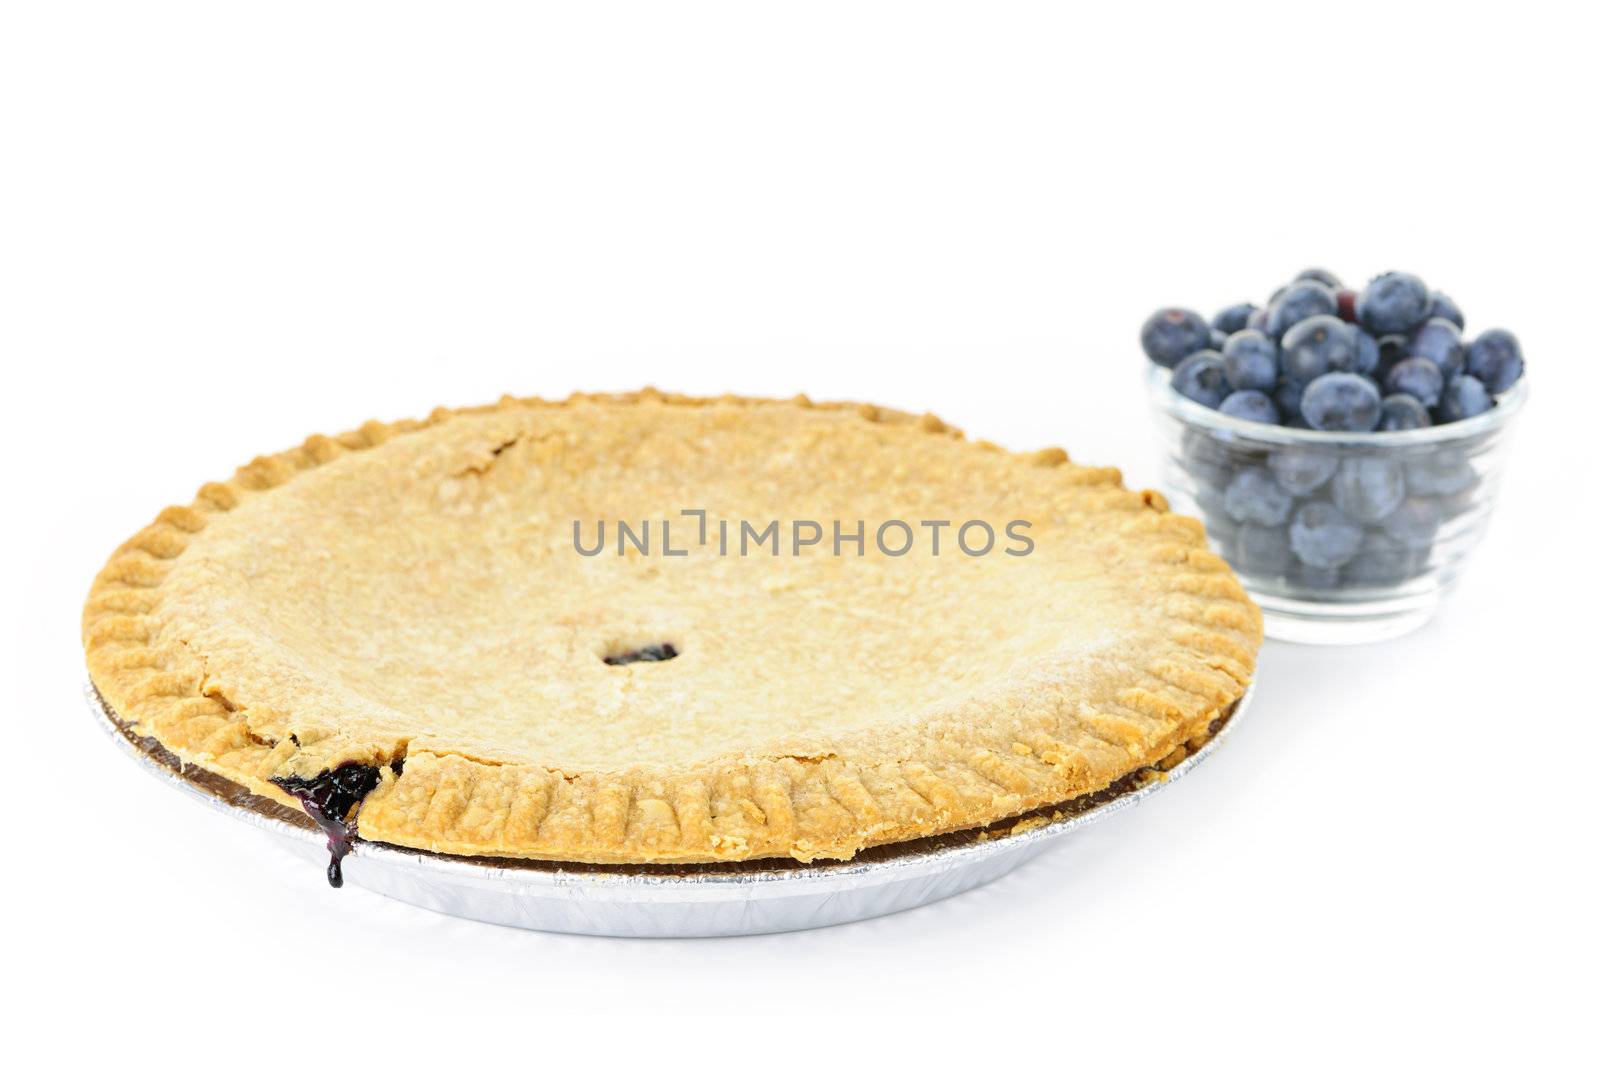 Whole blueberry pie with fresh wild blueberries isolated on white background